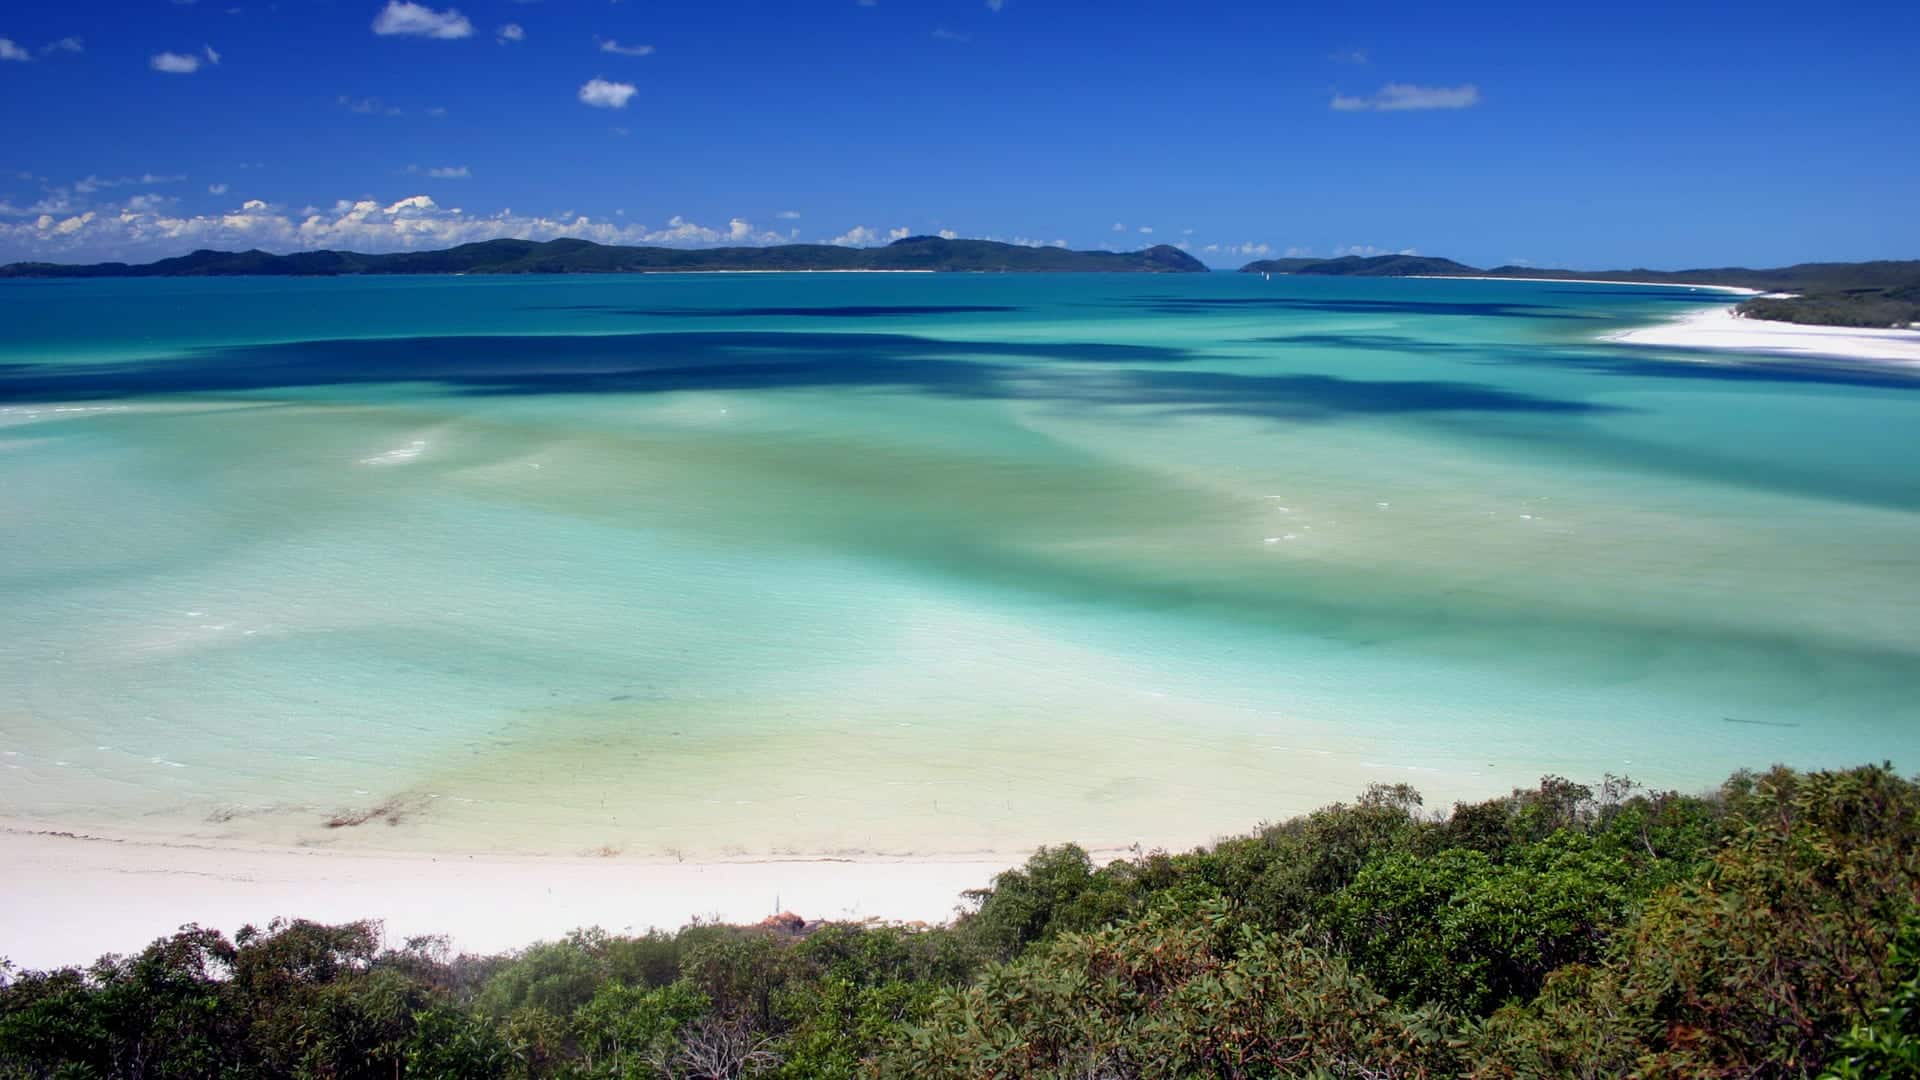 Visit Australia for: White sand and turquoise waters of Whitehaven Beach